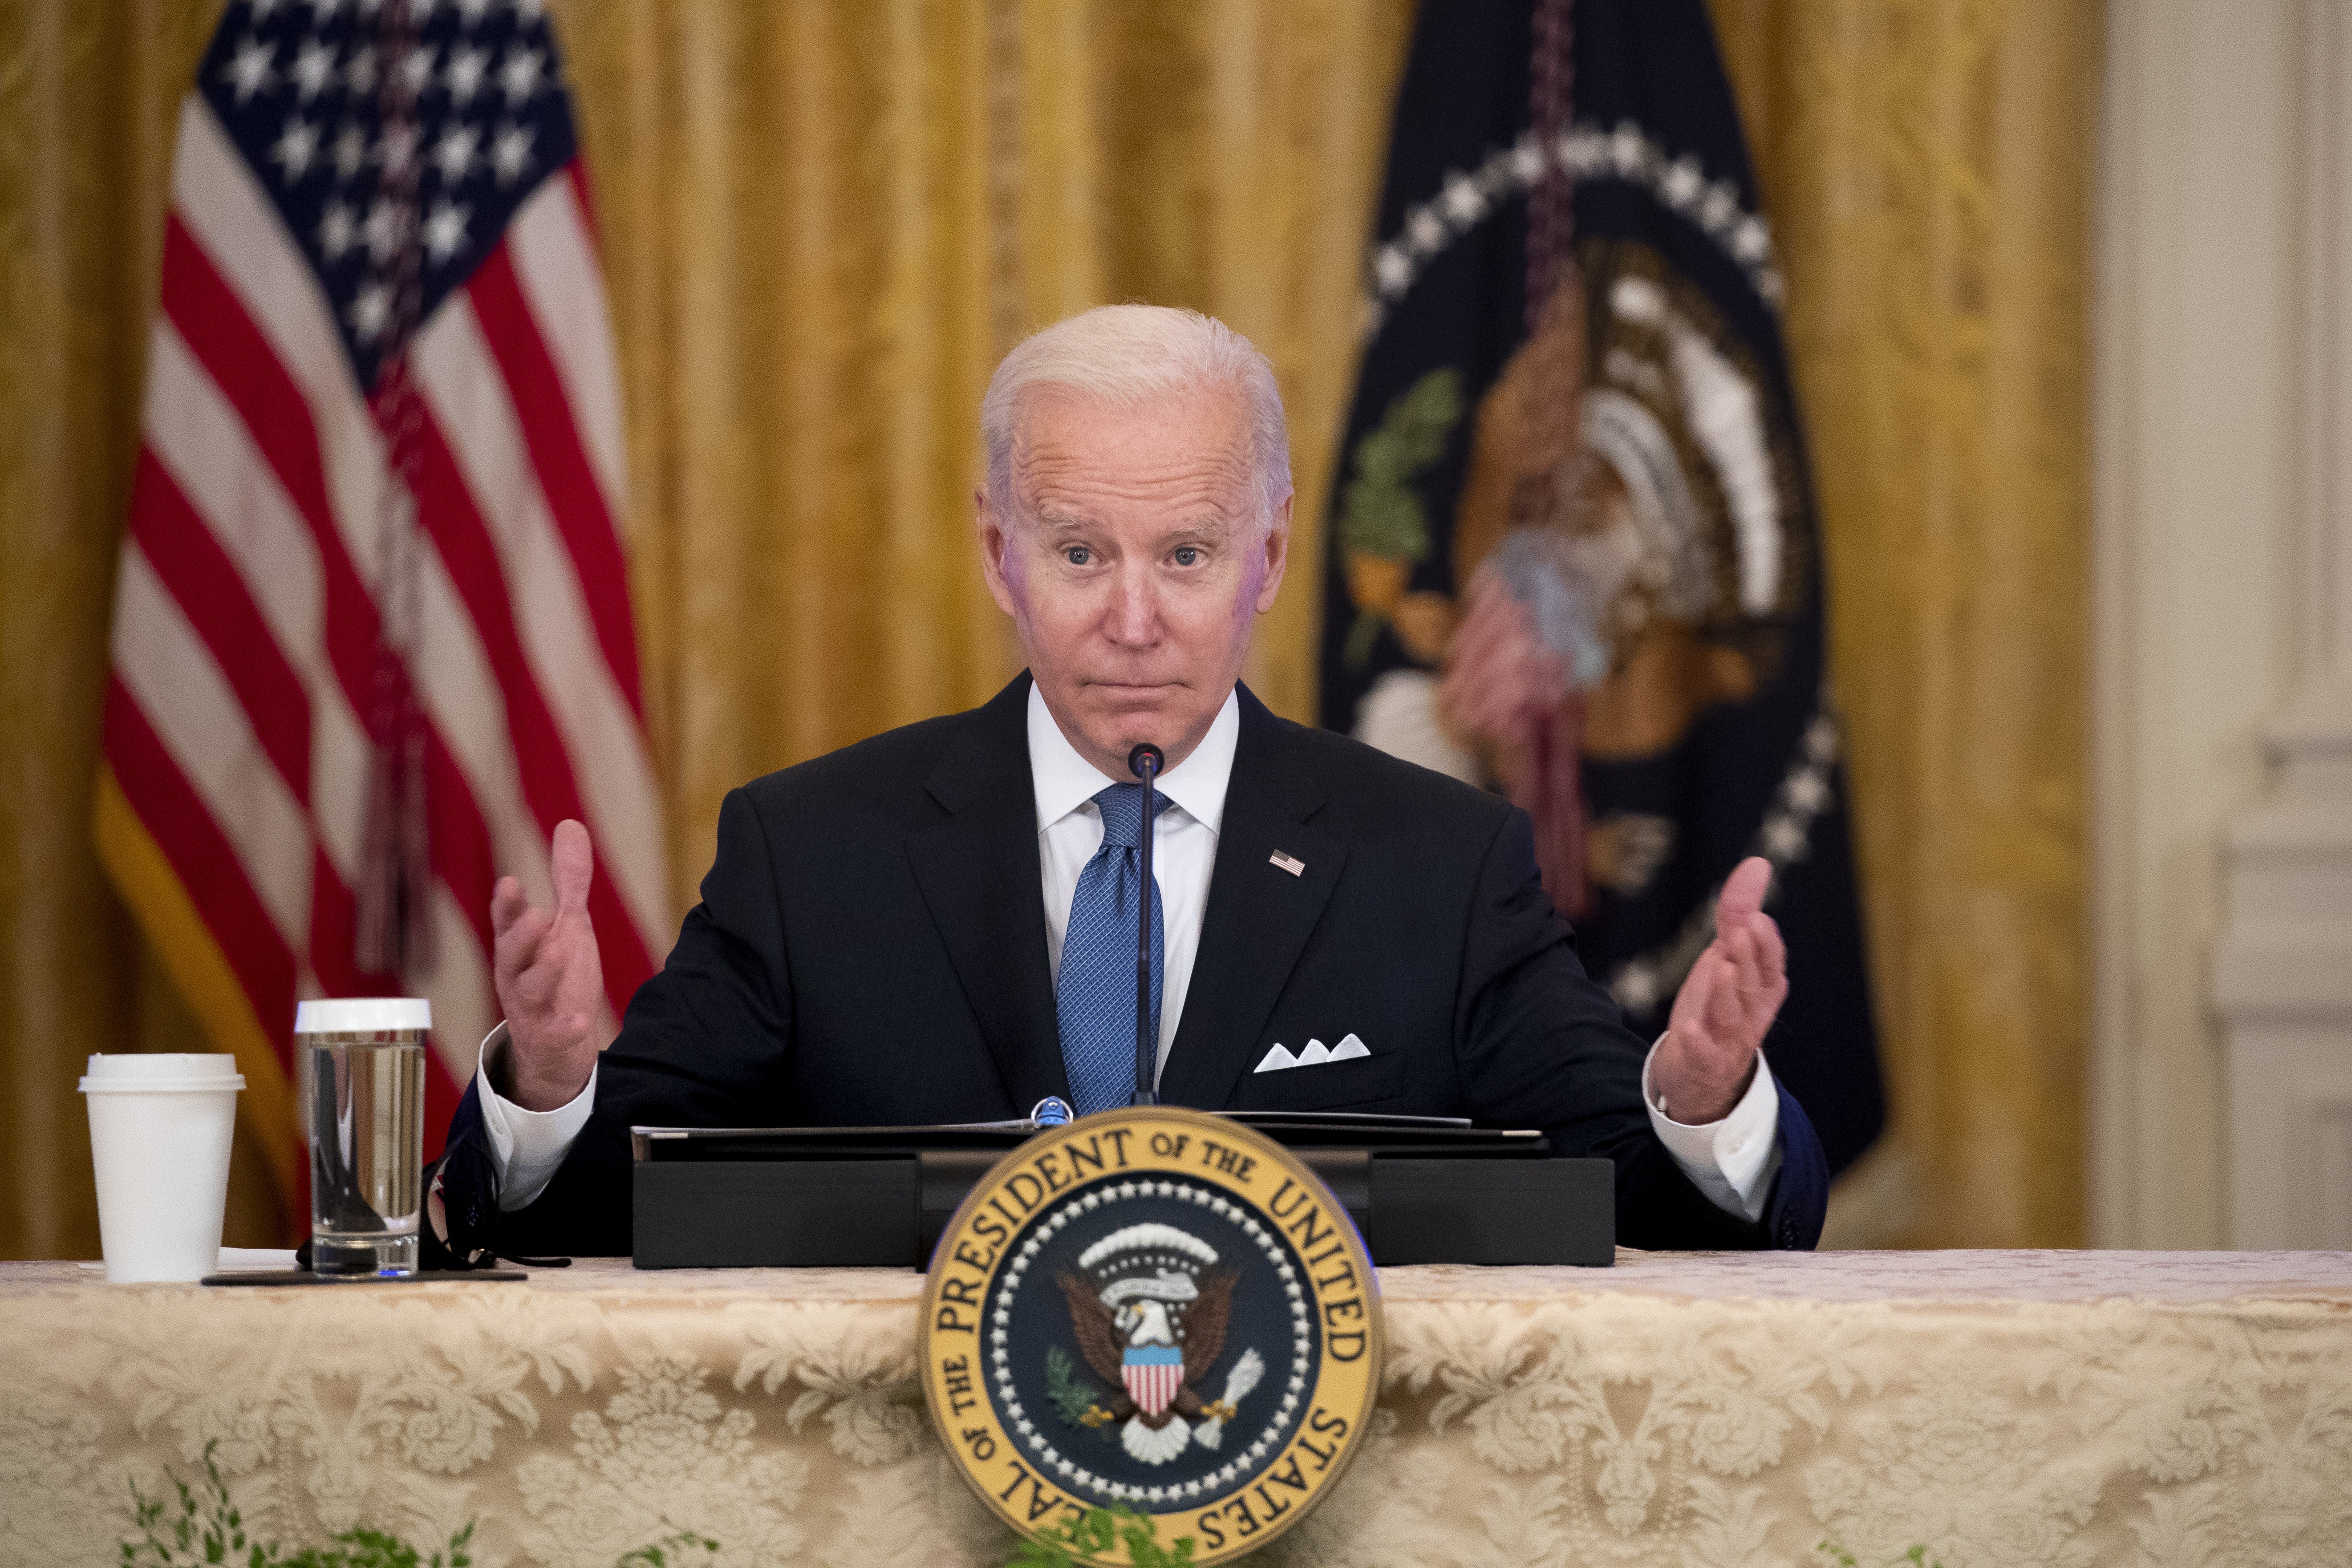 Biden gesturing with both hands as he sits with a presidential seal in front of him